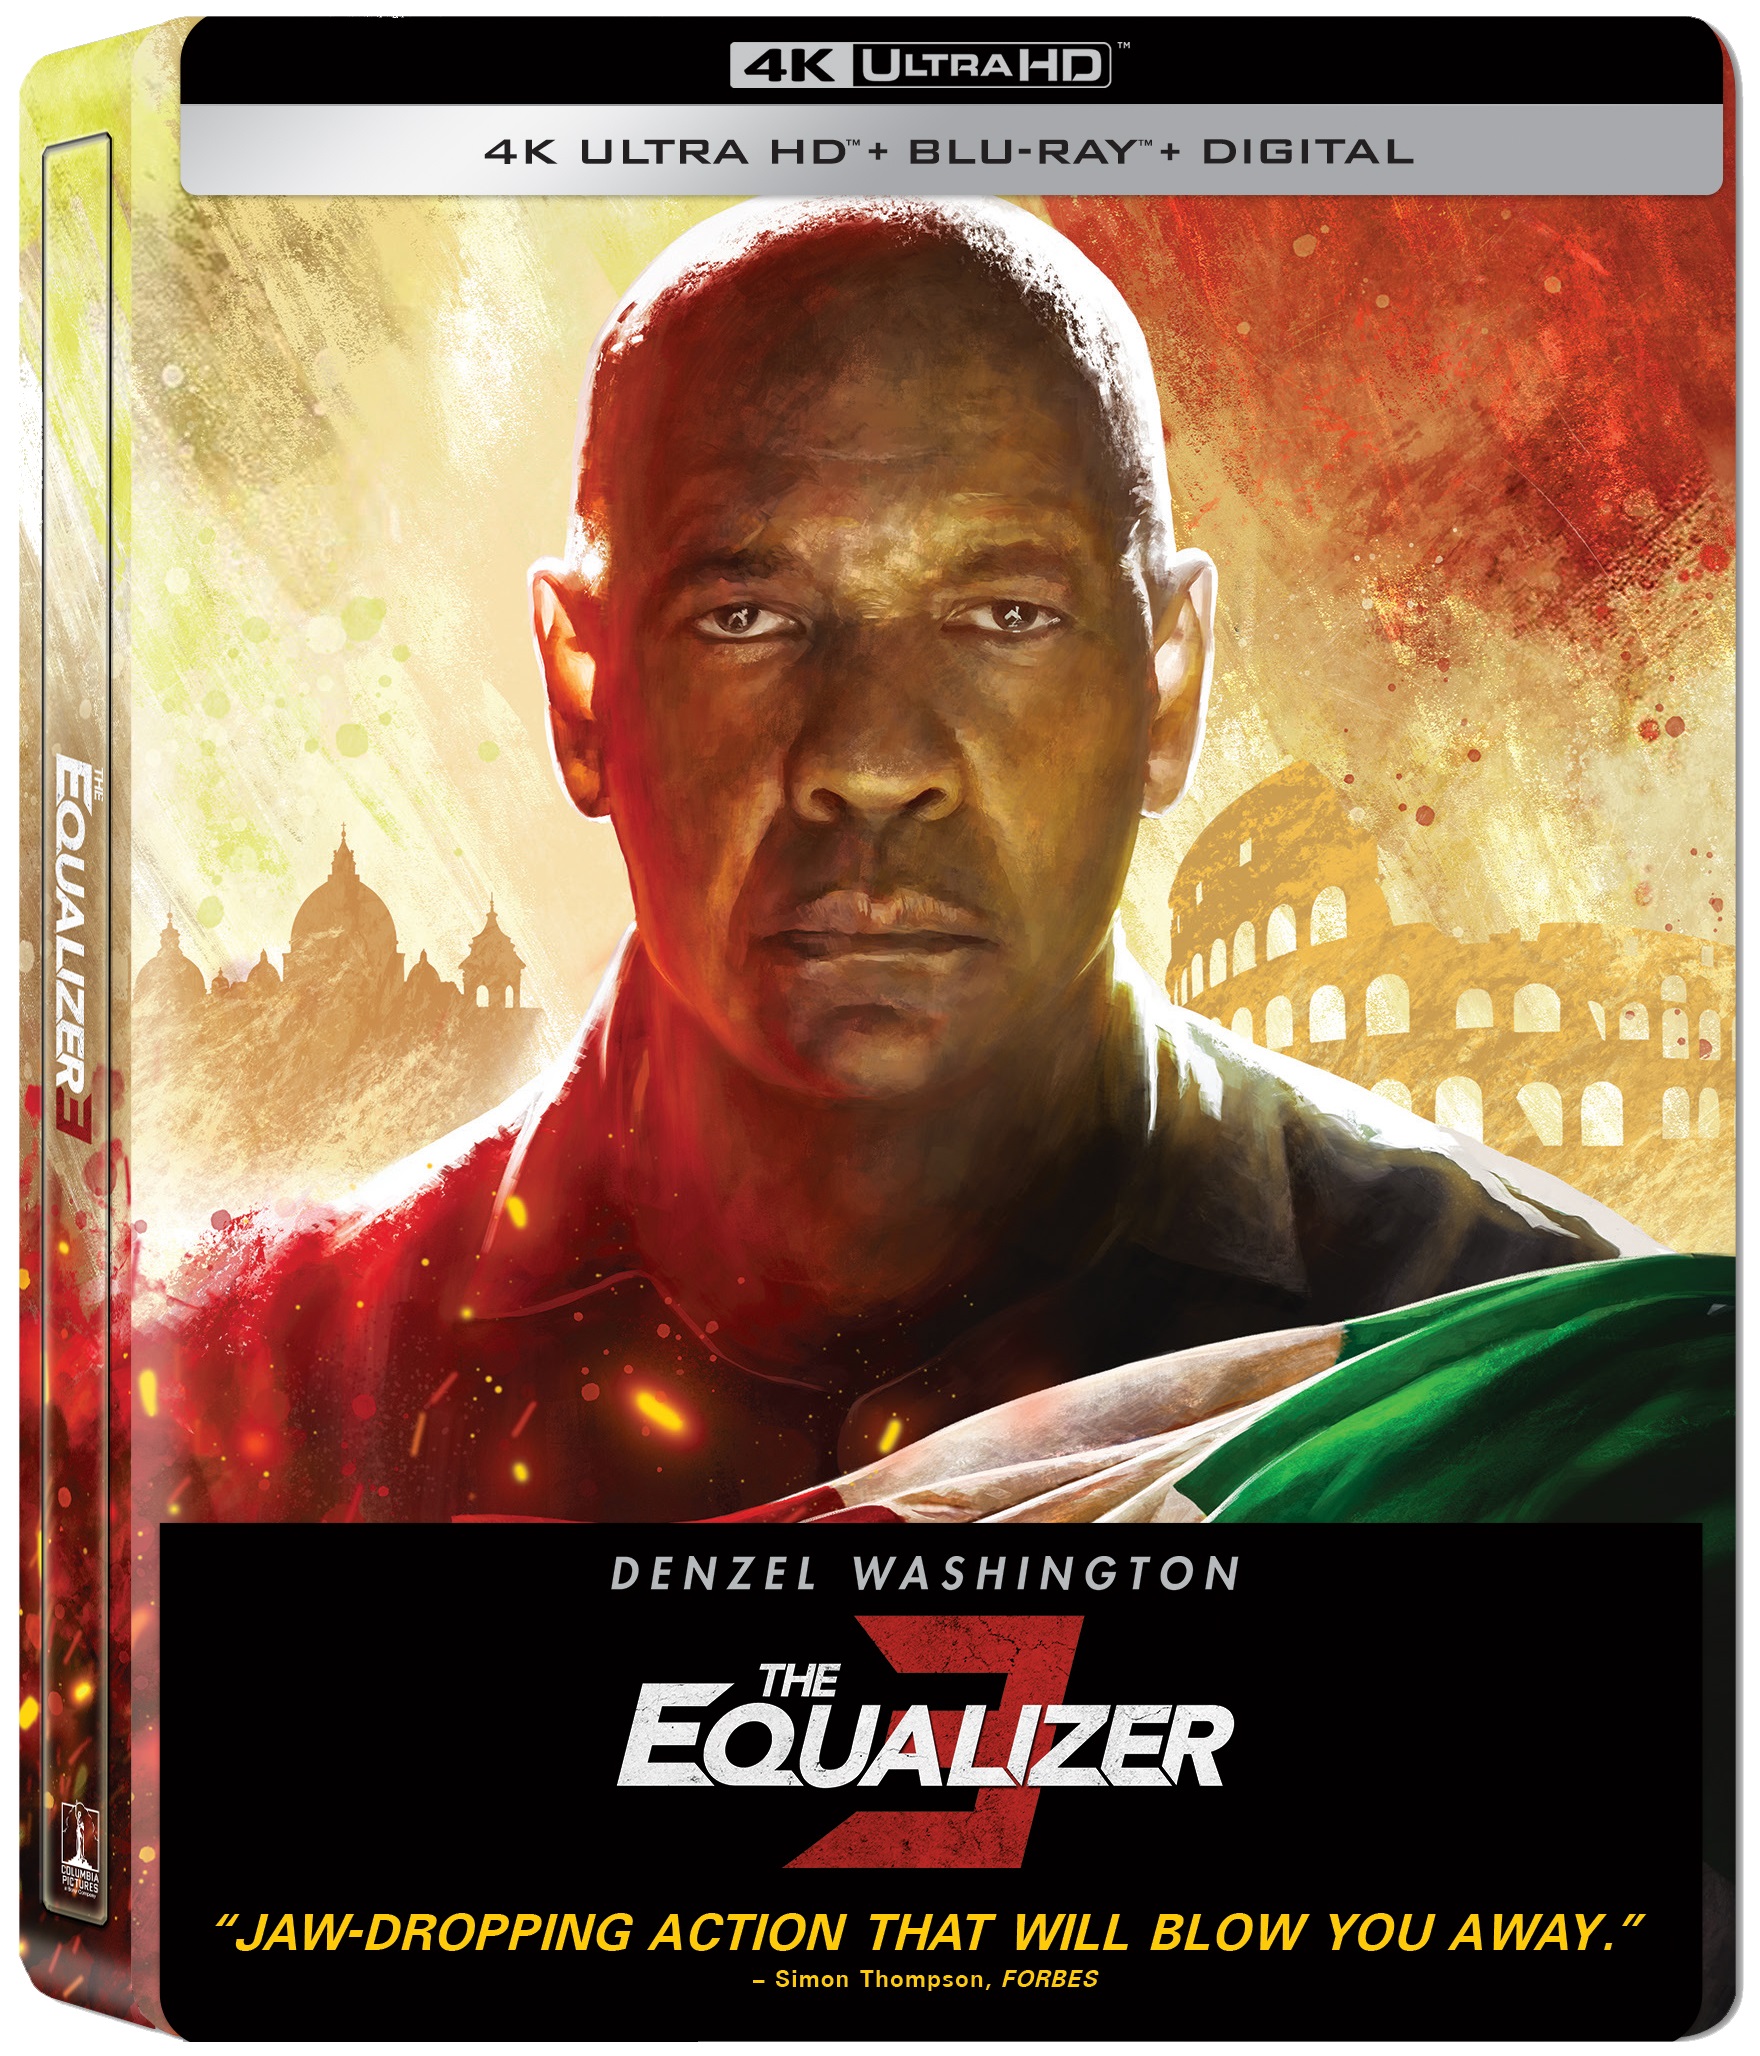 The Equalizer 3 [Includes Digital Copy] [Blu-ray] [2023] - Best Buy